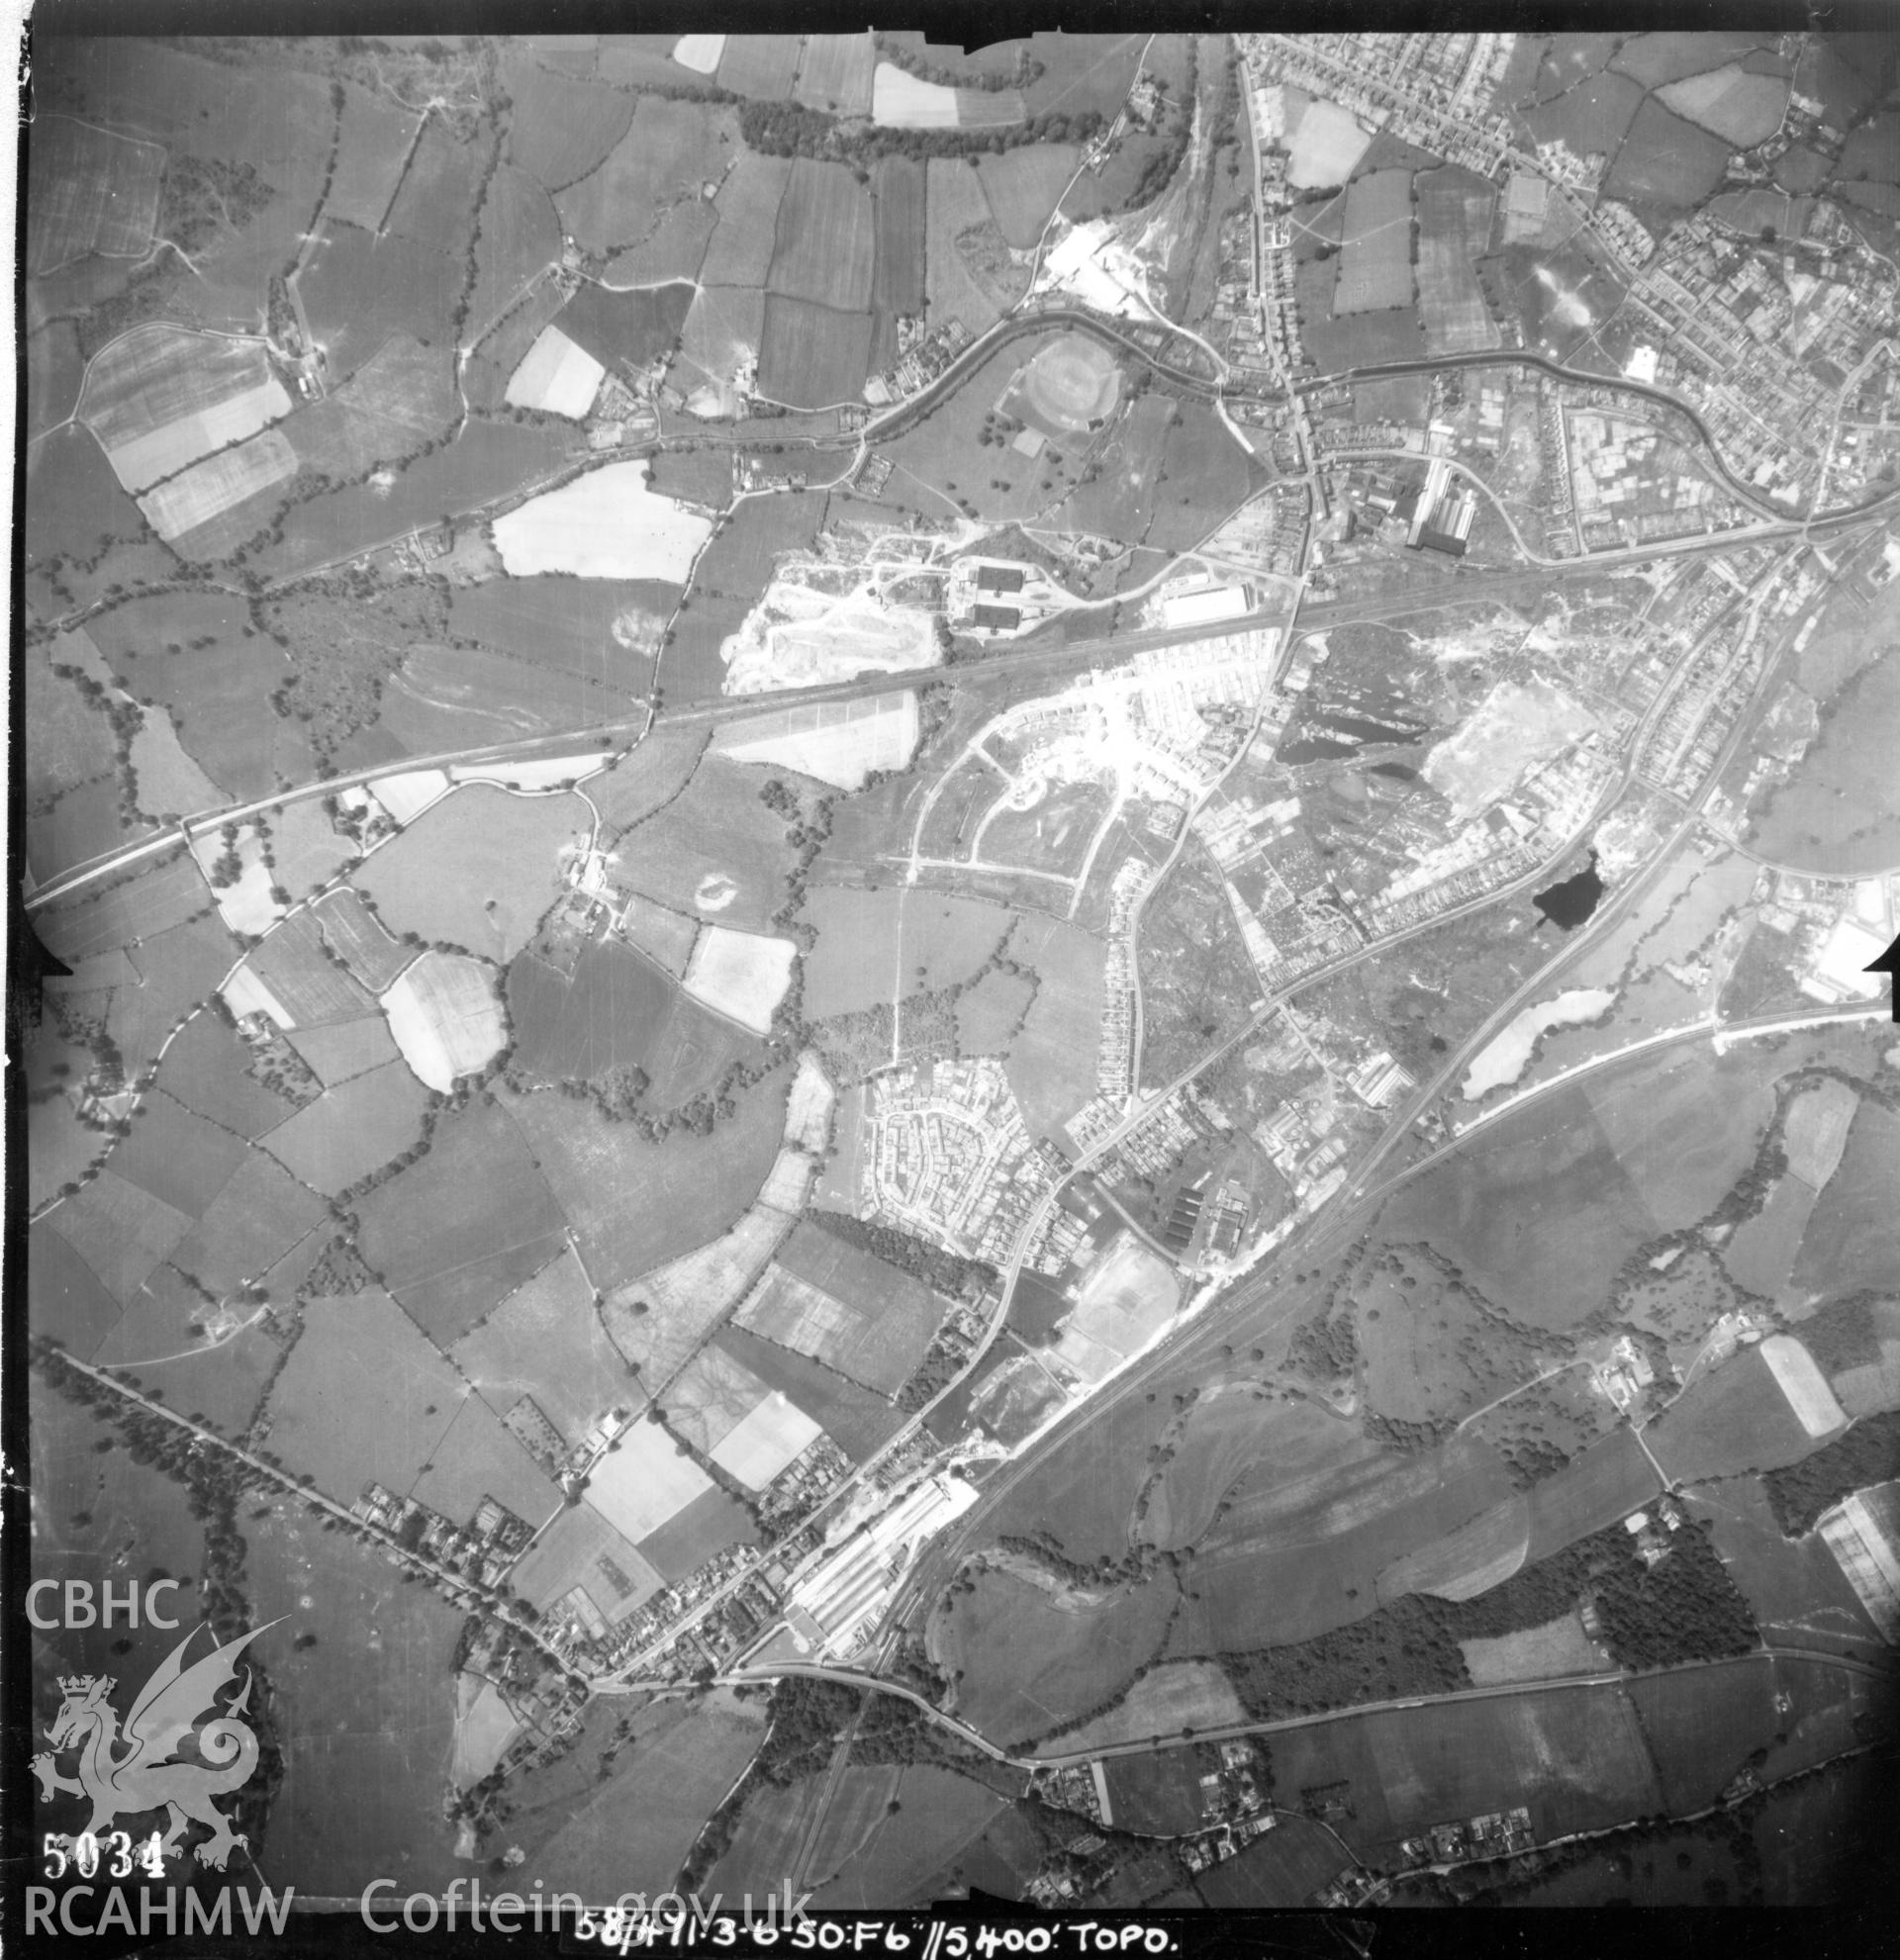 Aerial photograph of Cwmbran, taken on 3rd June 1950. Included as part of Archaeology Wales' desk based assessment of former Llantarnam Community Primary School, Croeswen, Oakfield, Cwmbran, conducted in 2017.